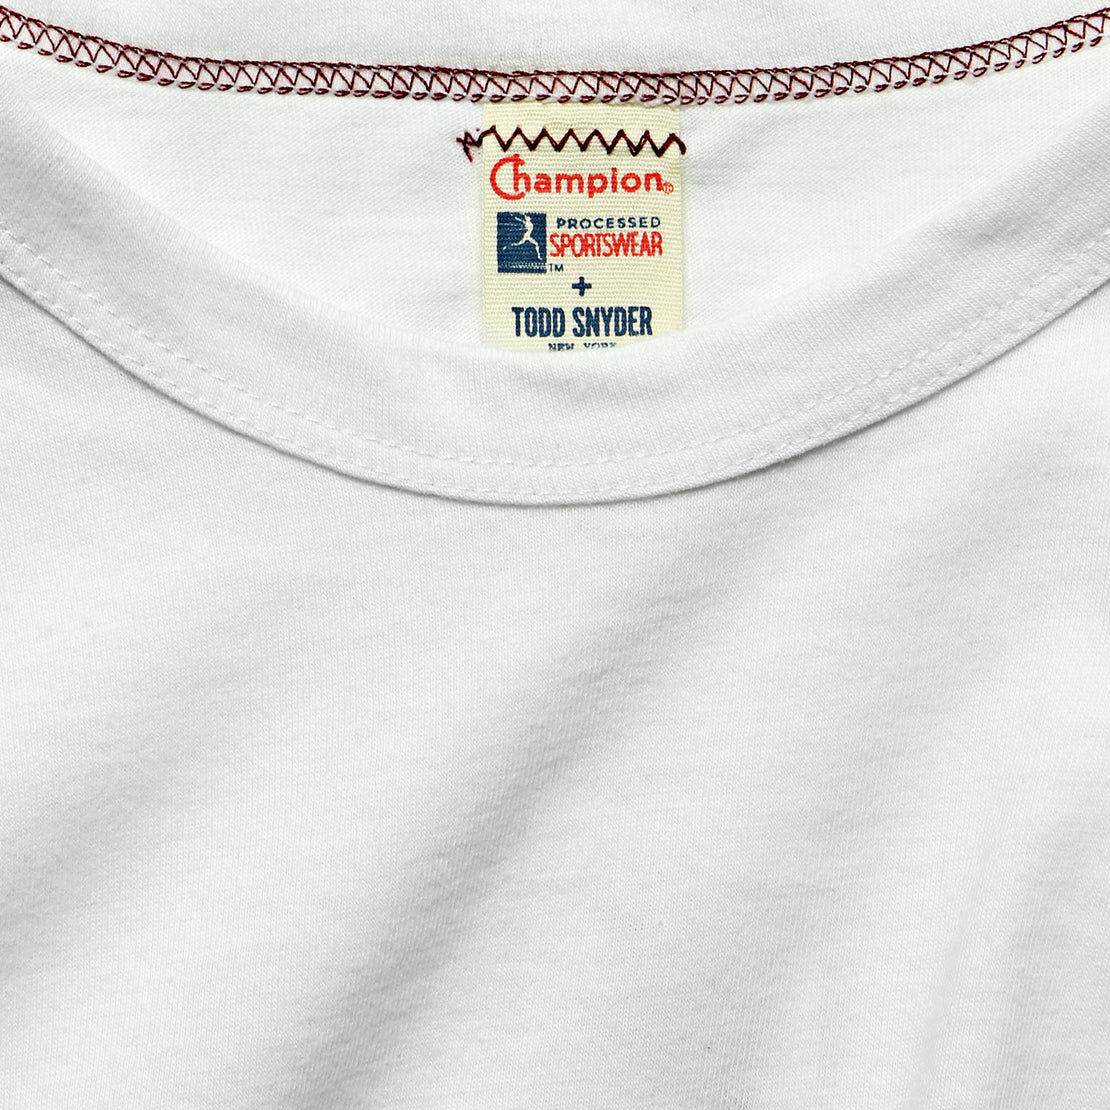 Basic Tee - White - Todd Snyder - STAG Provisions - Tops - S/S Tee